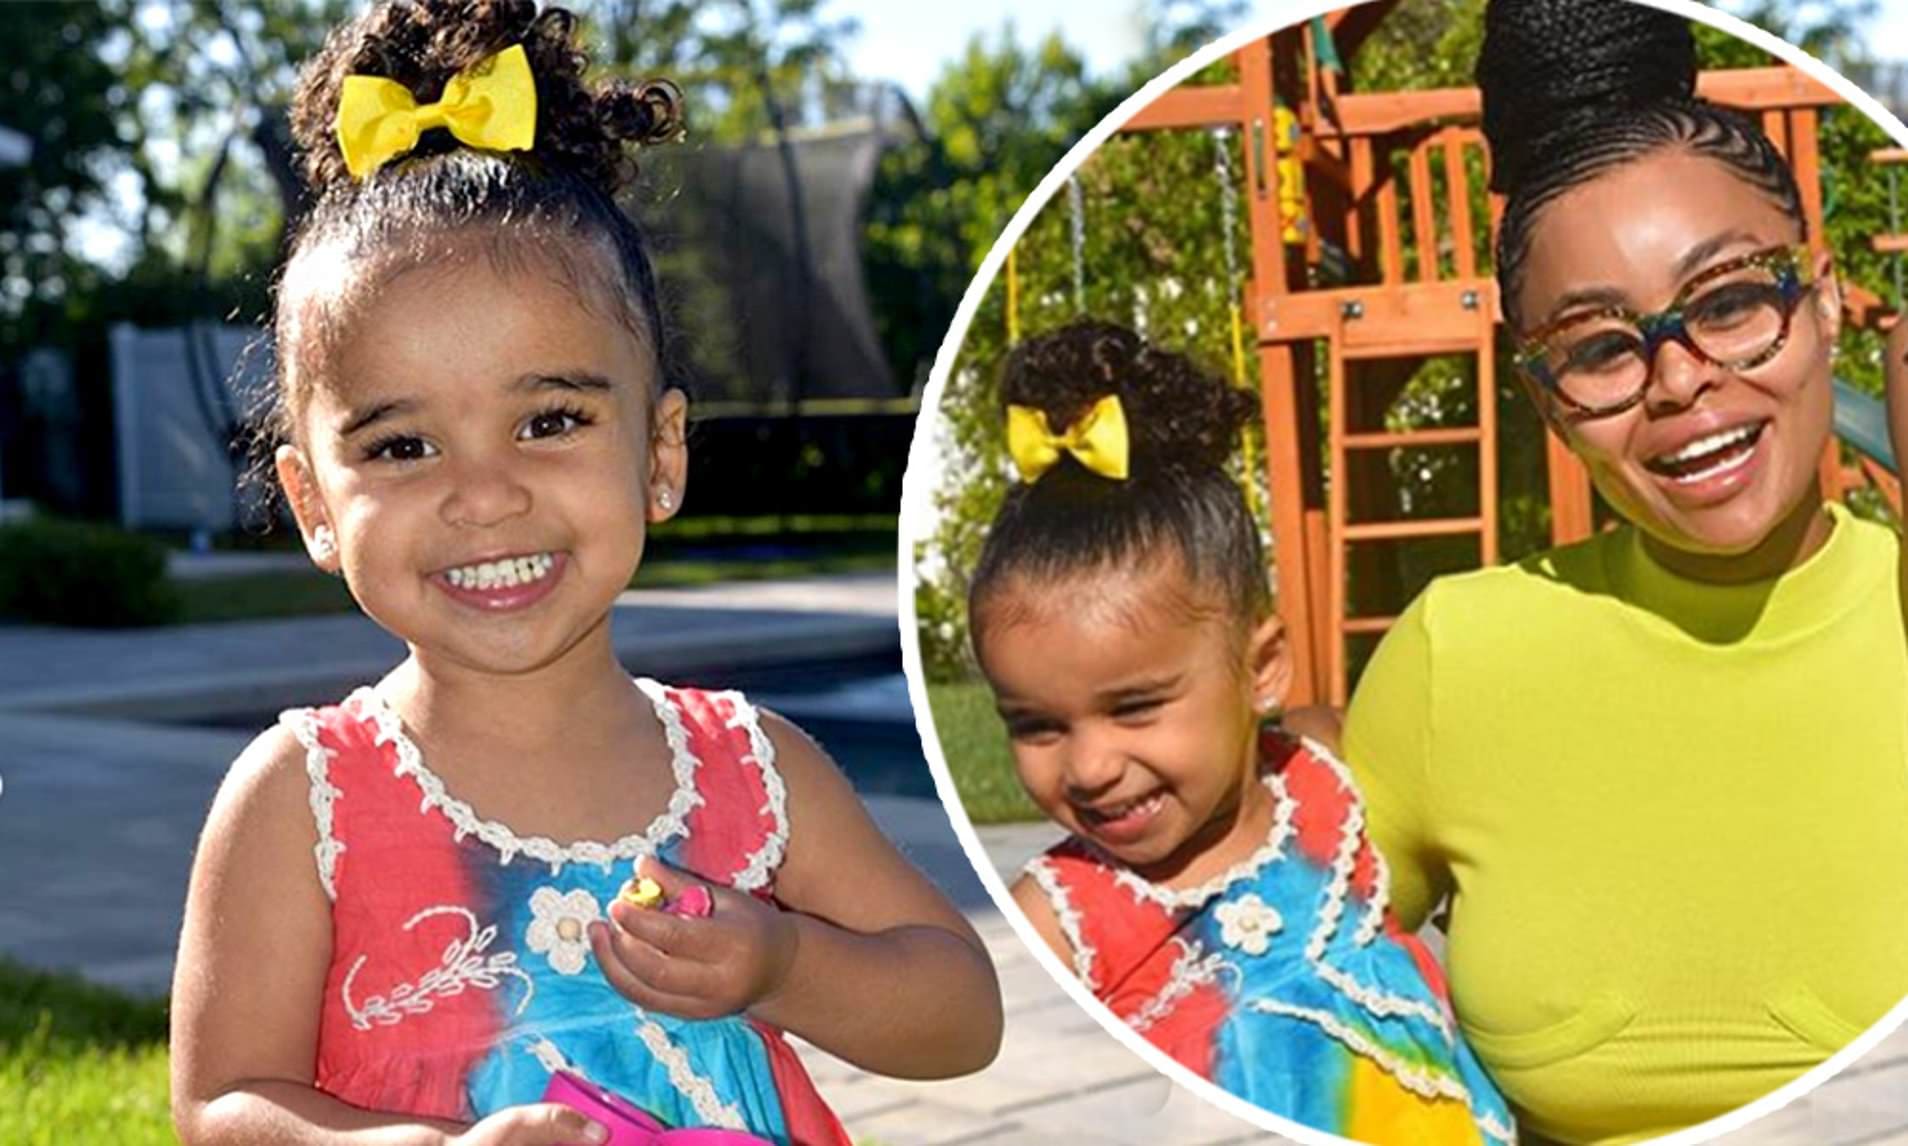 Blac Chyna's Latest Video Featuring Her Daughter, Dream Kardashian Makes Fans' Day